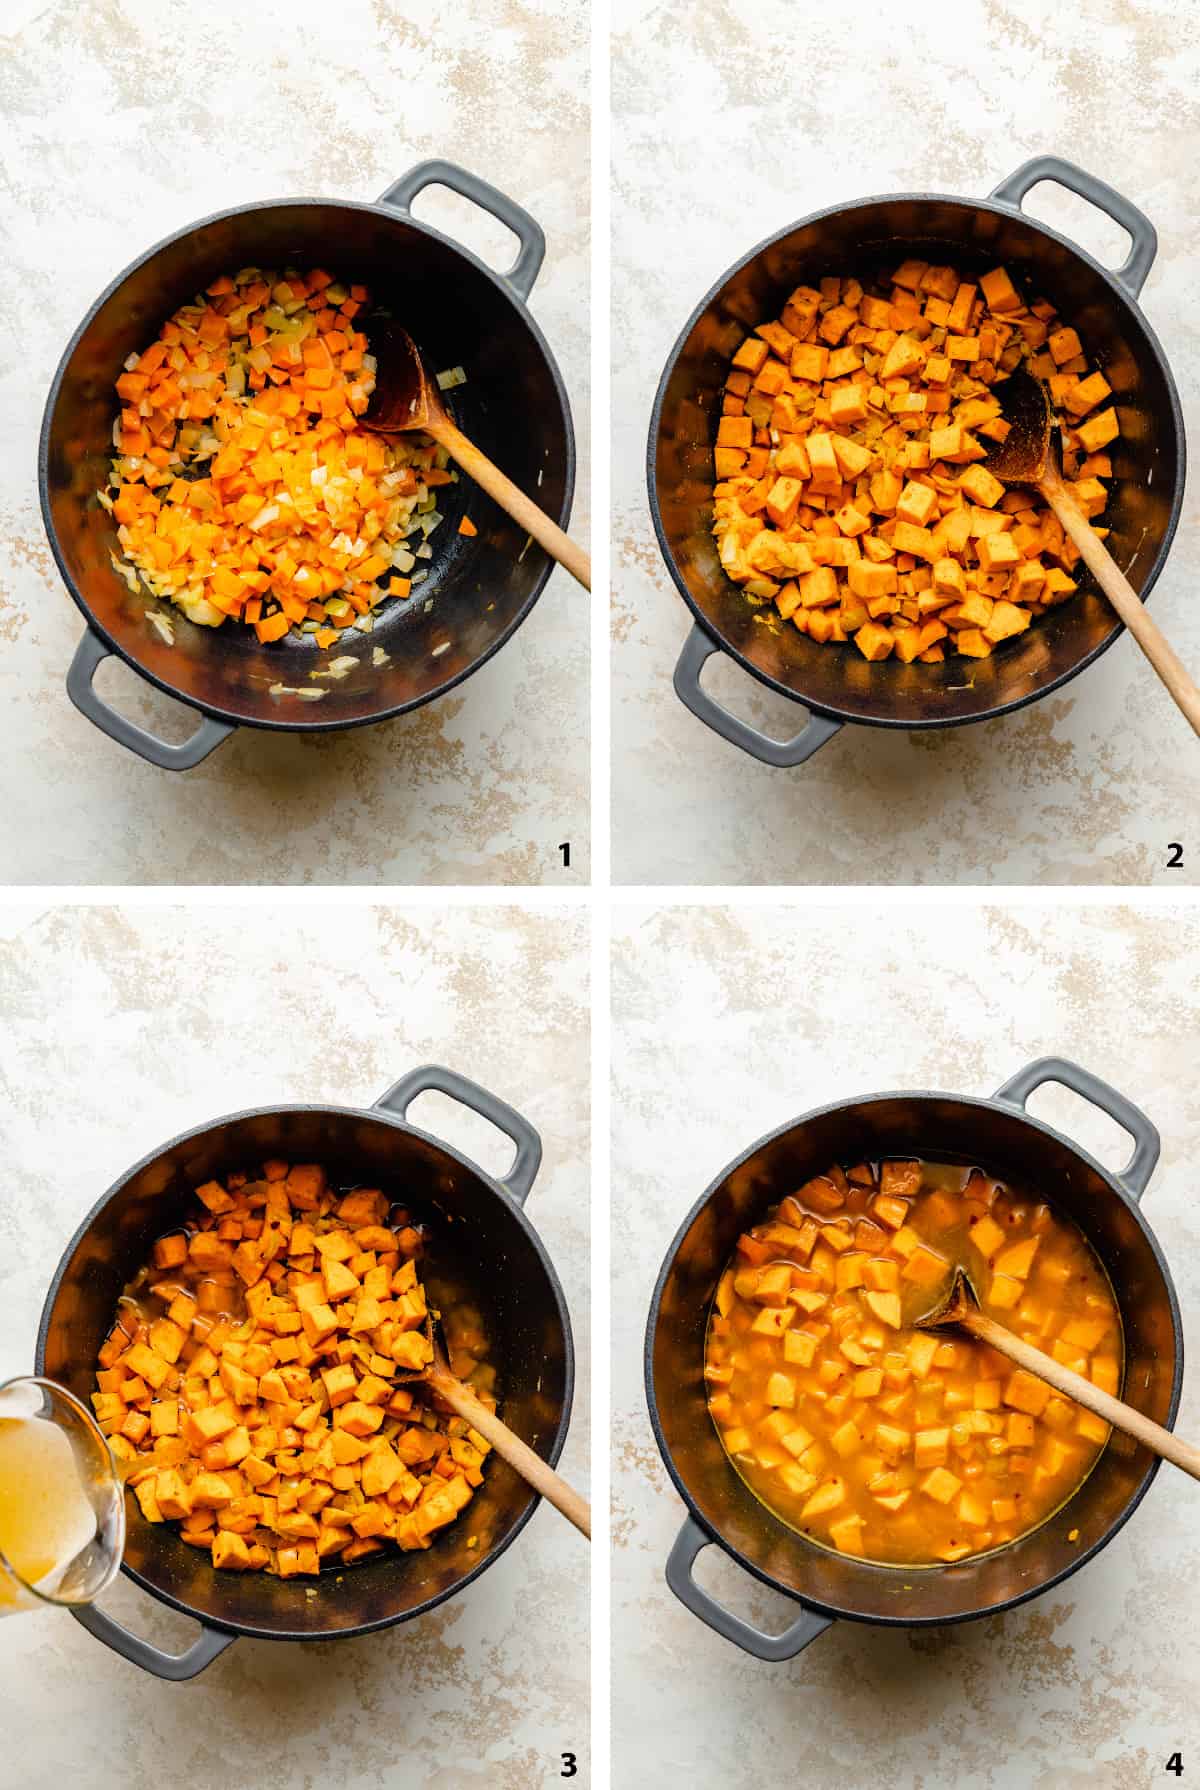 Process steps showing the onions and carrots sautéed, adding the sweet potato and spices, stock and cooked soup.